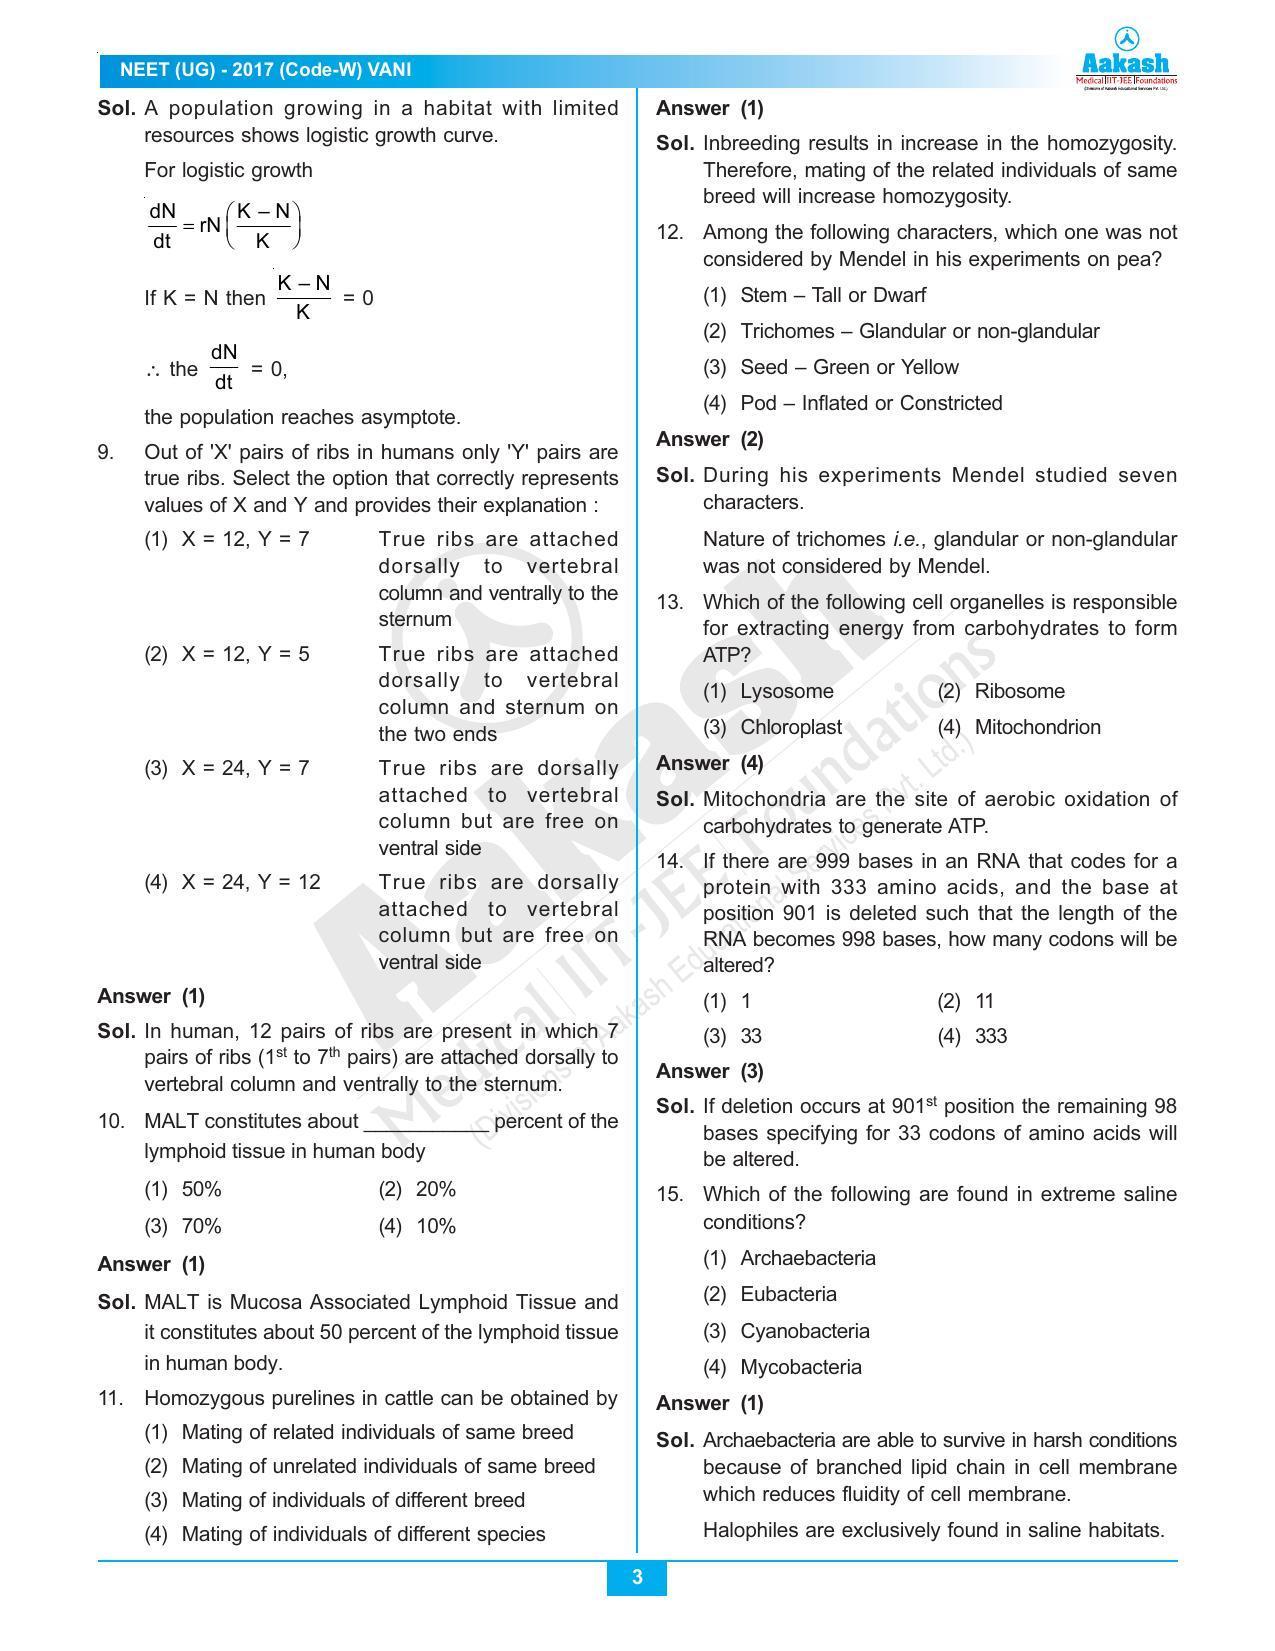  NEET Code W 2017 Answer & Solutions - Page 3